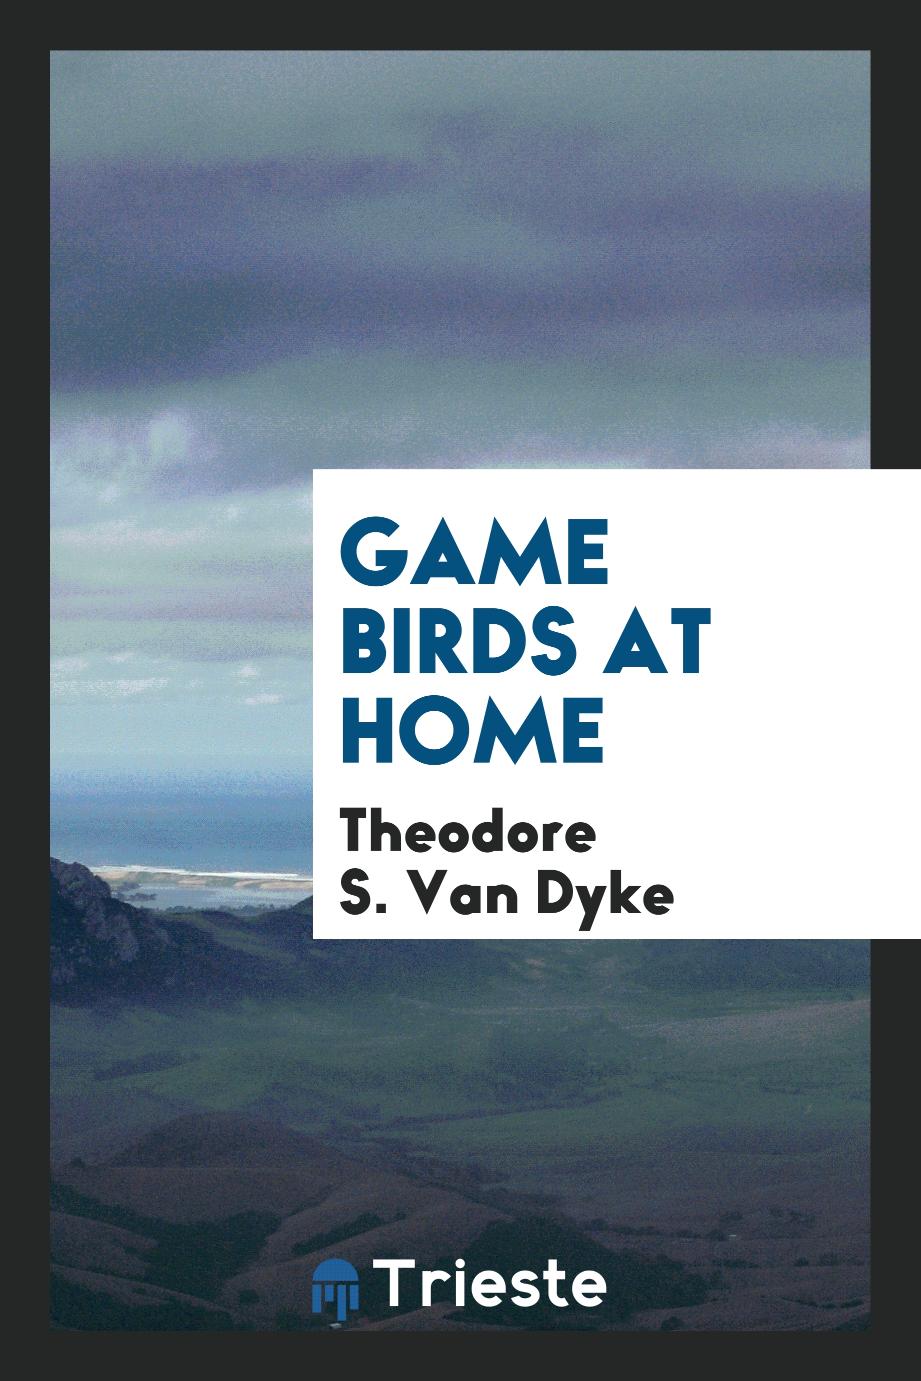 Game birds at home